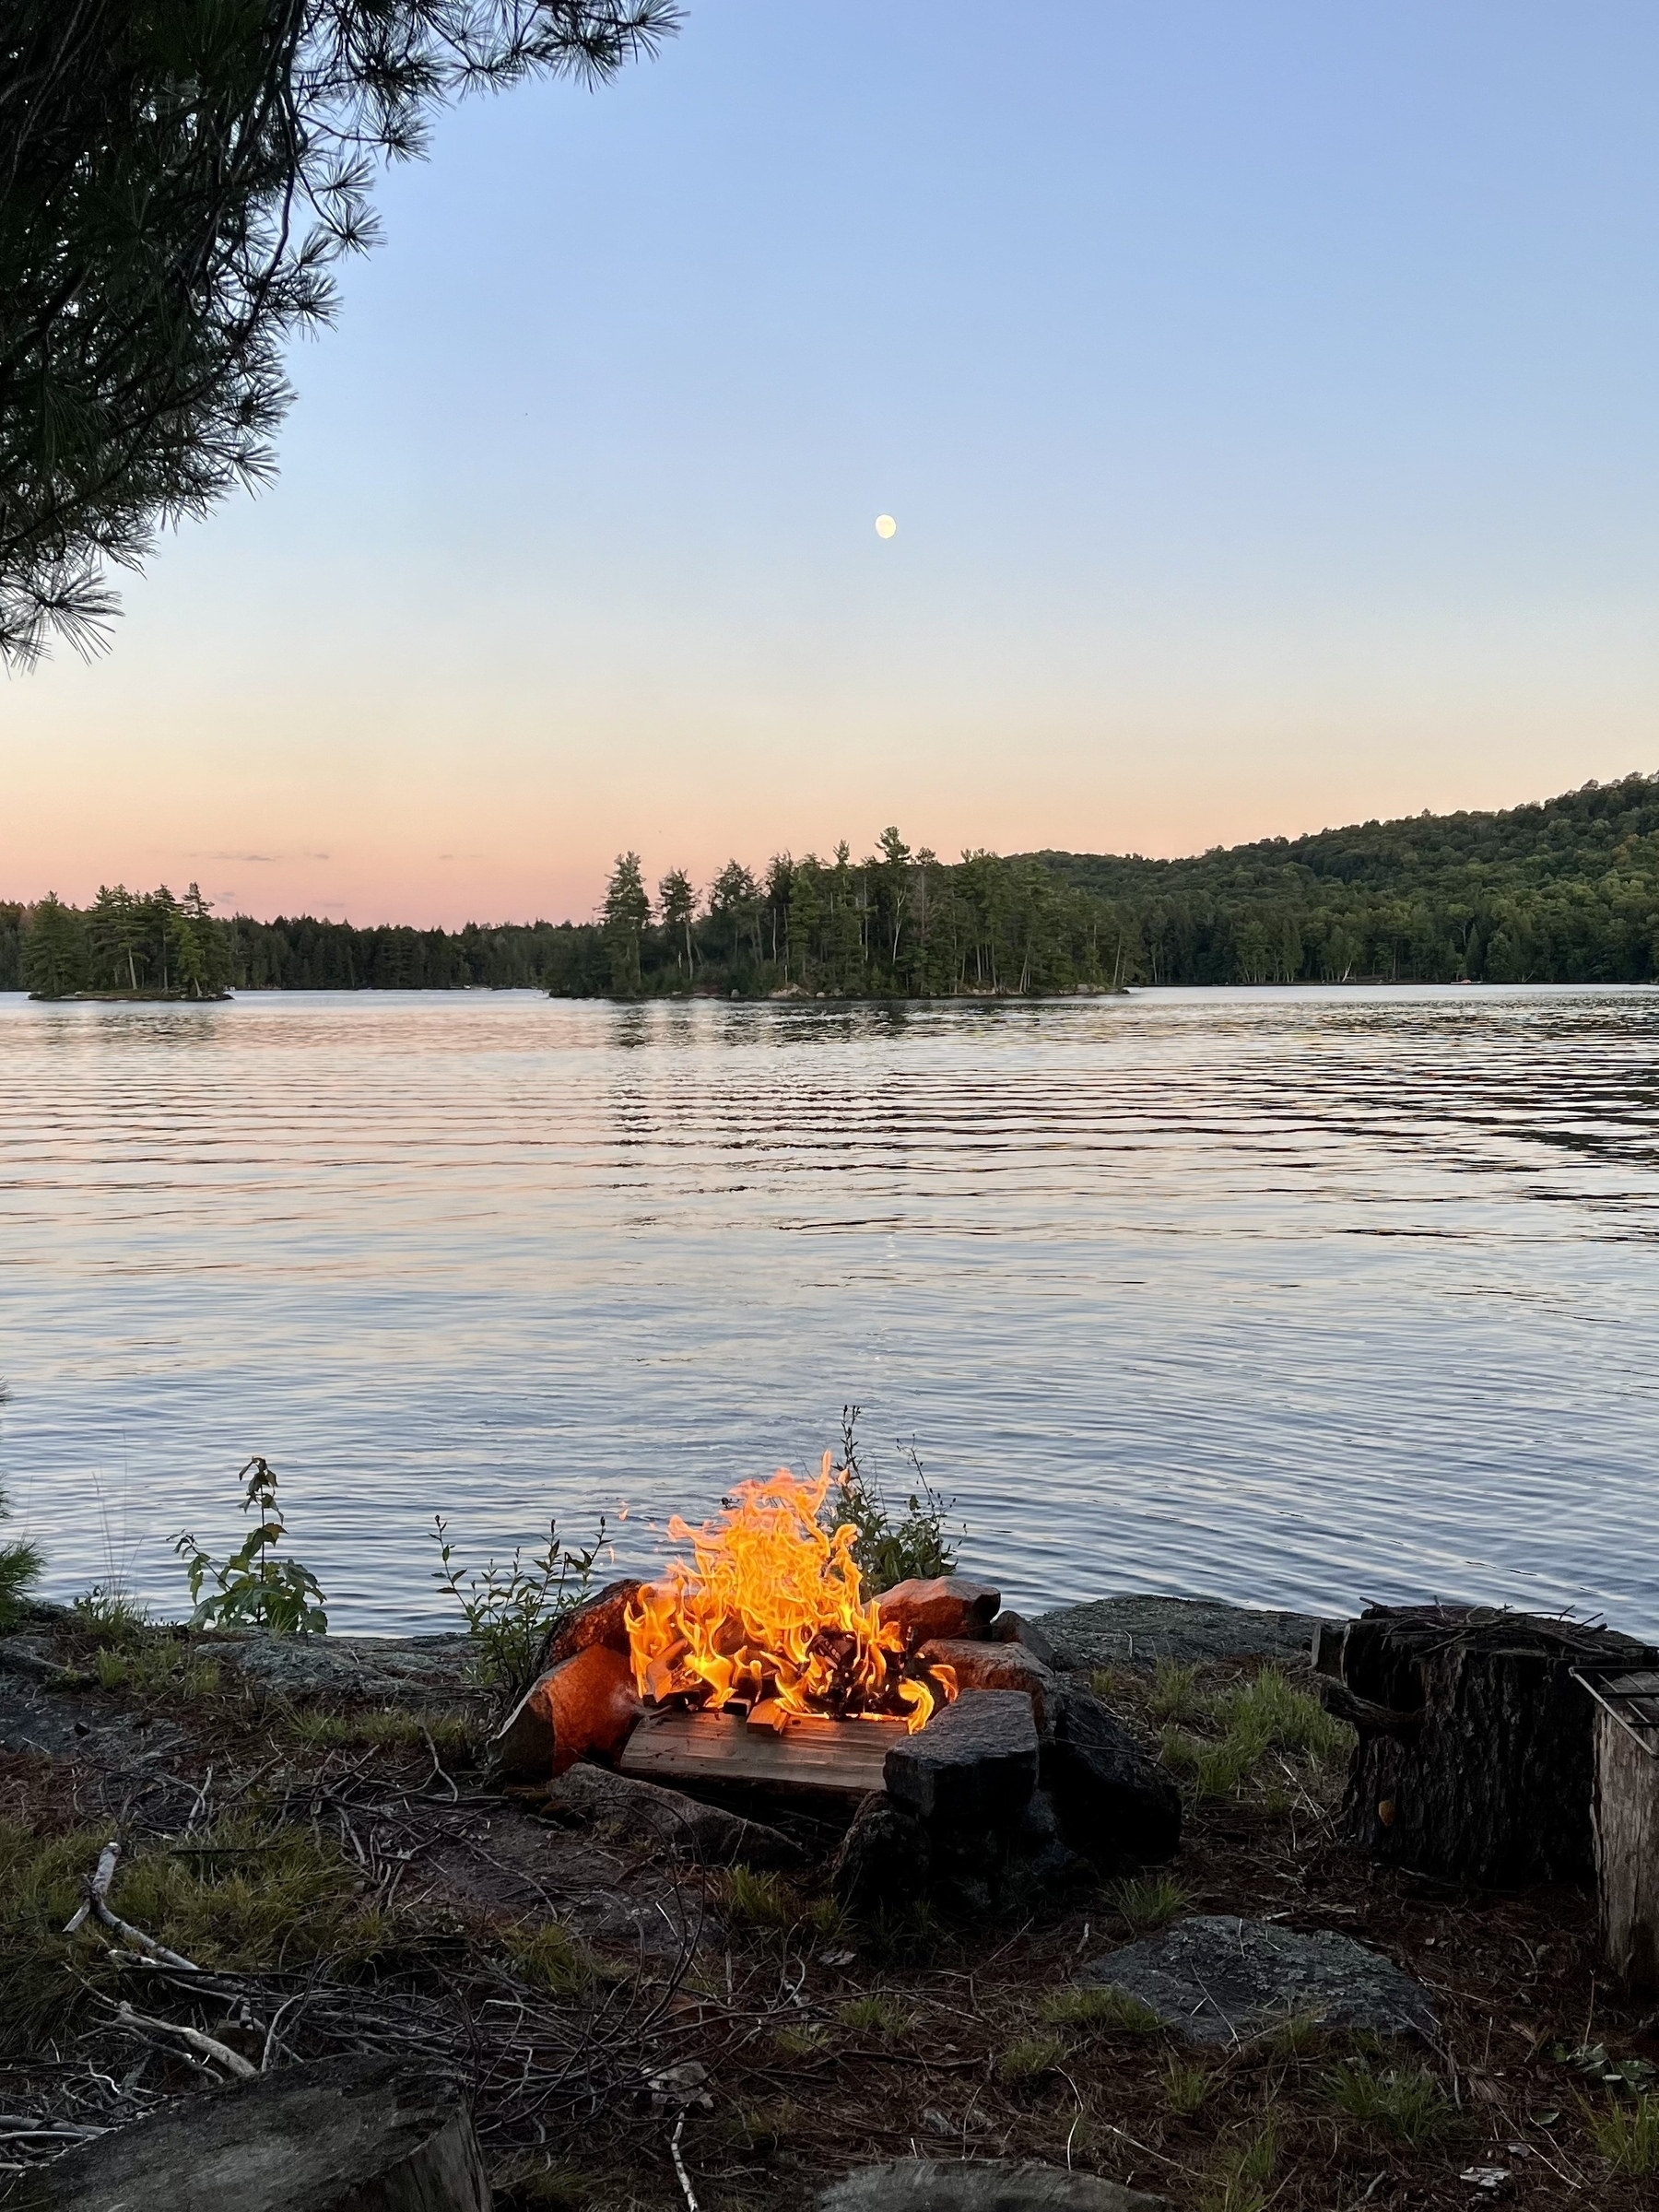 Campfire by lake with moon above